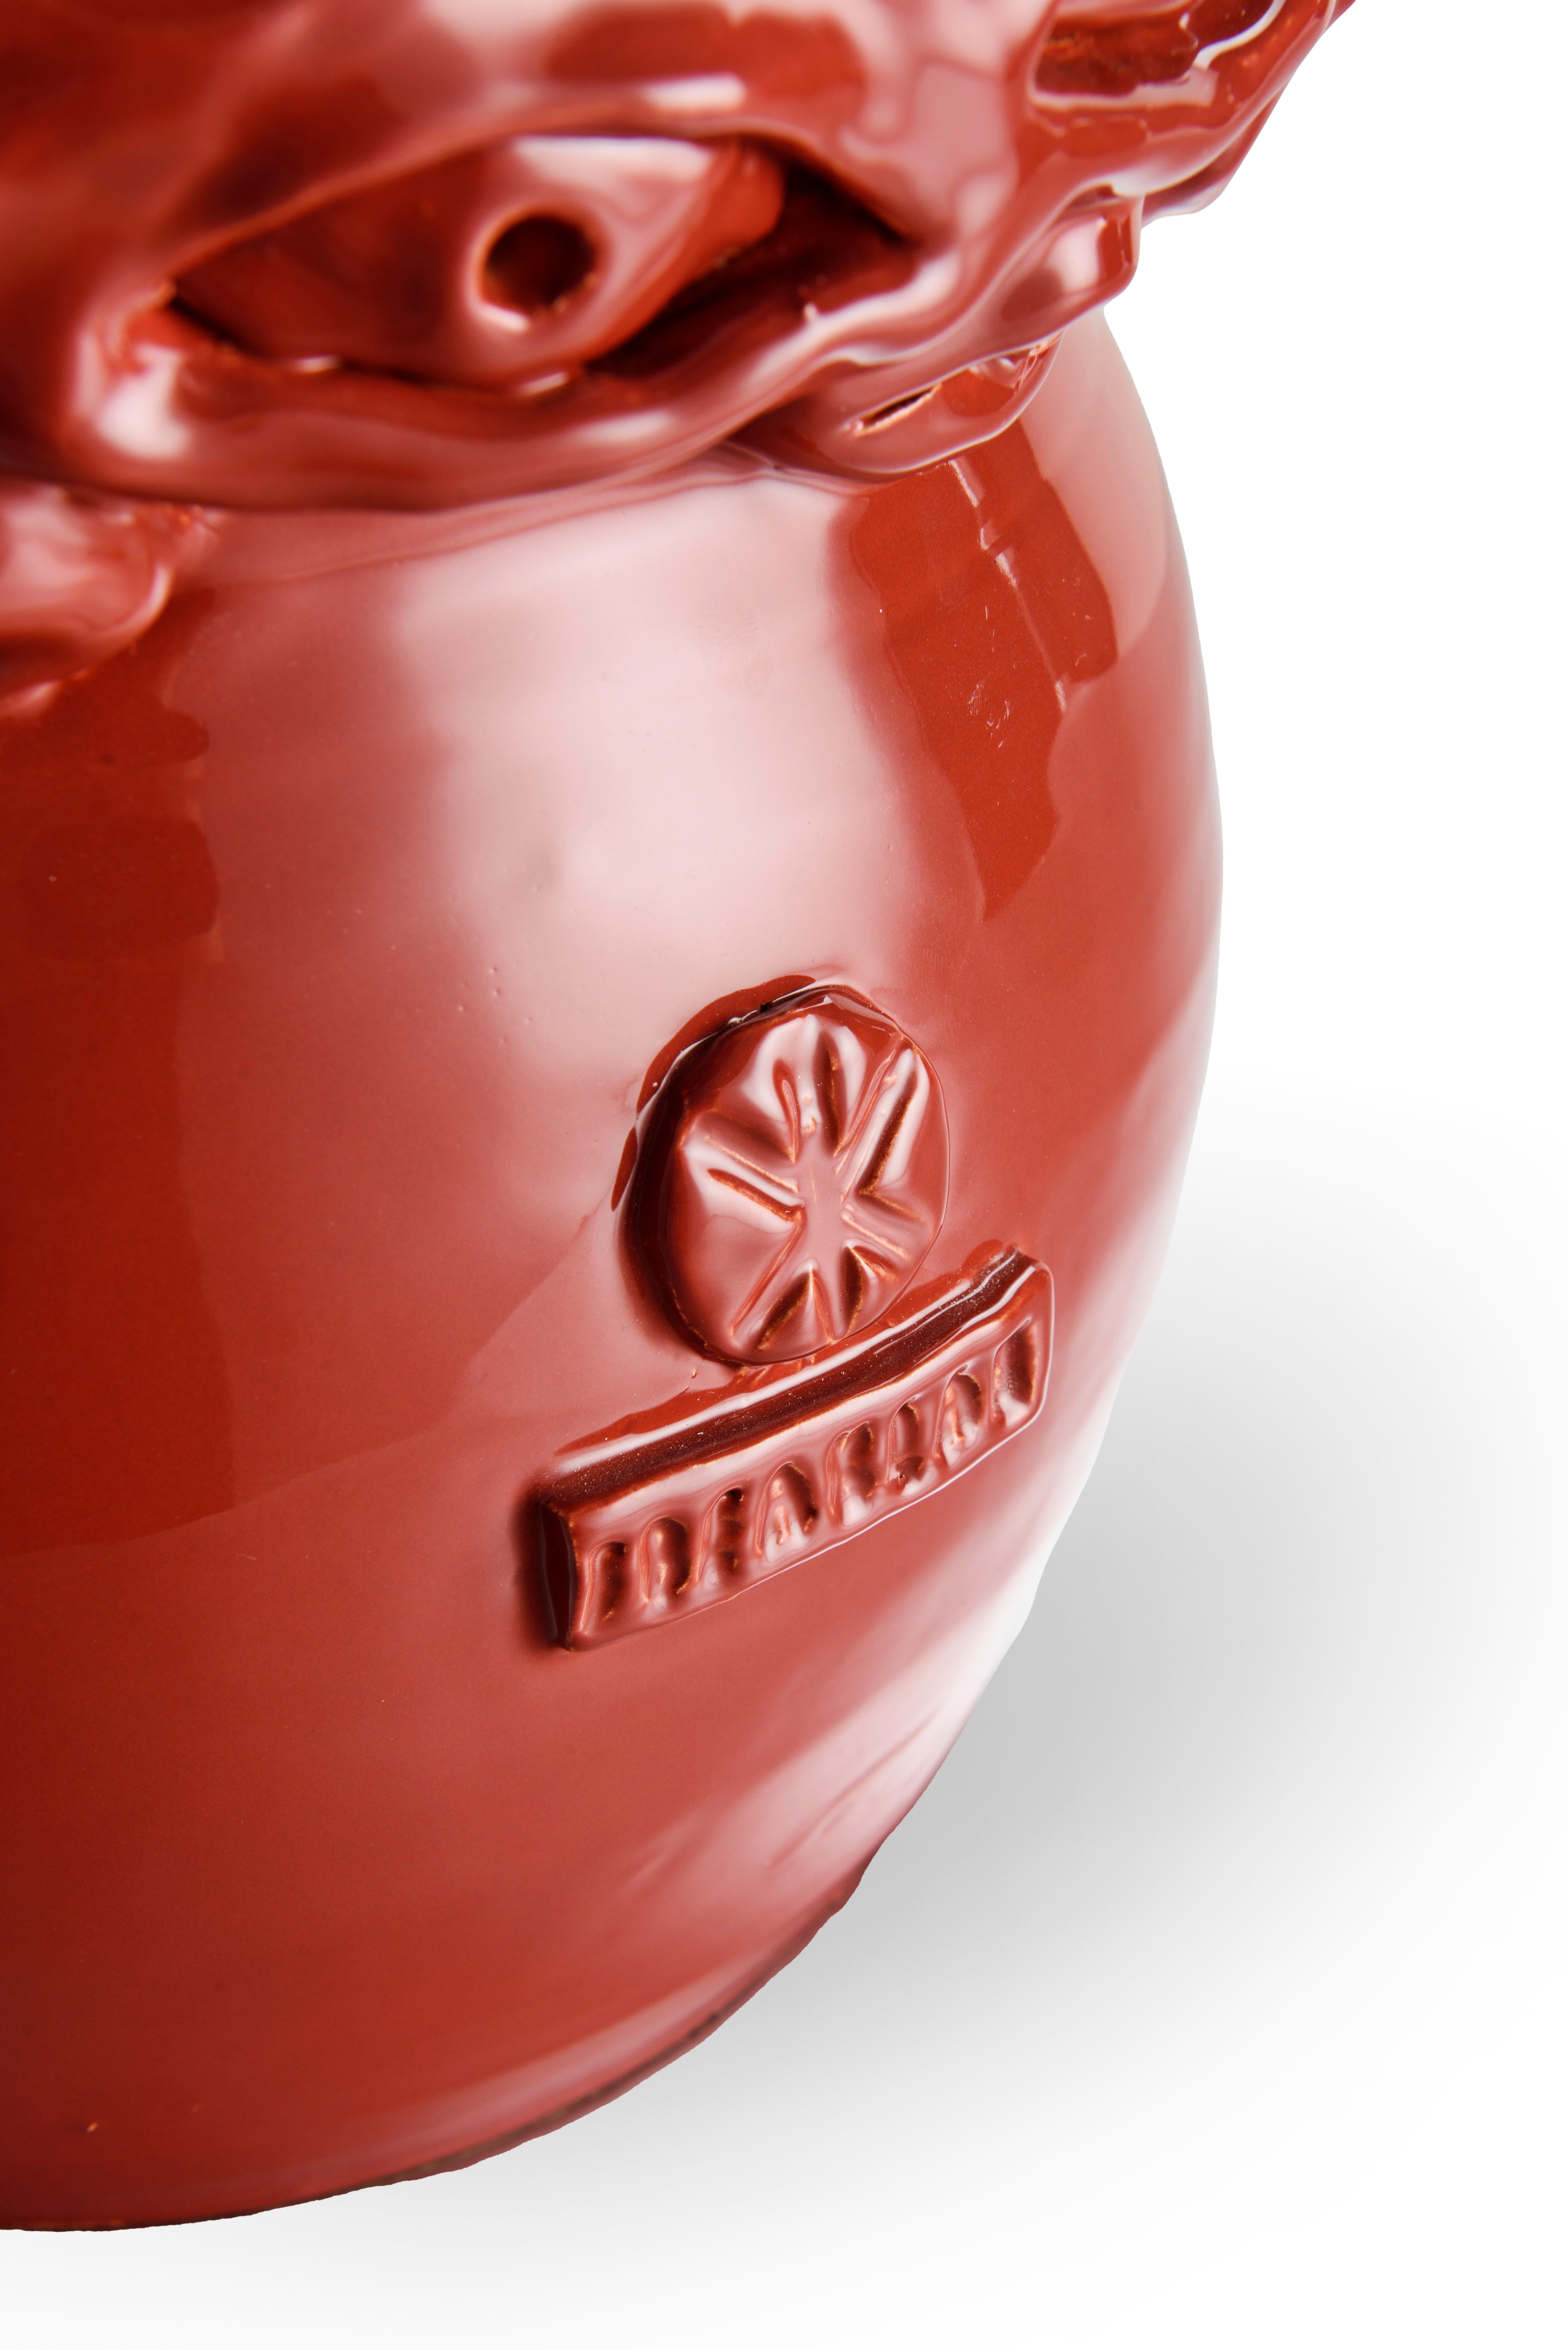 Enameled Freaklab vase made entirely by hand in ceramic, warm red color For Sale